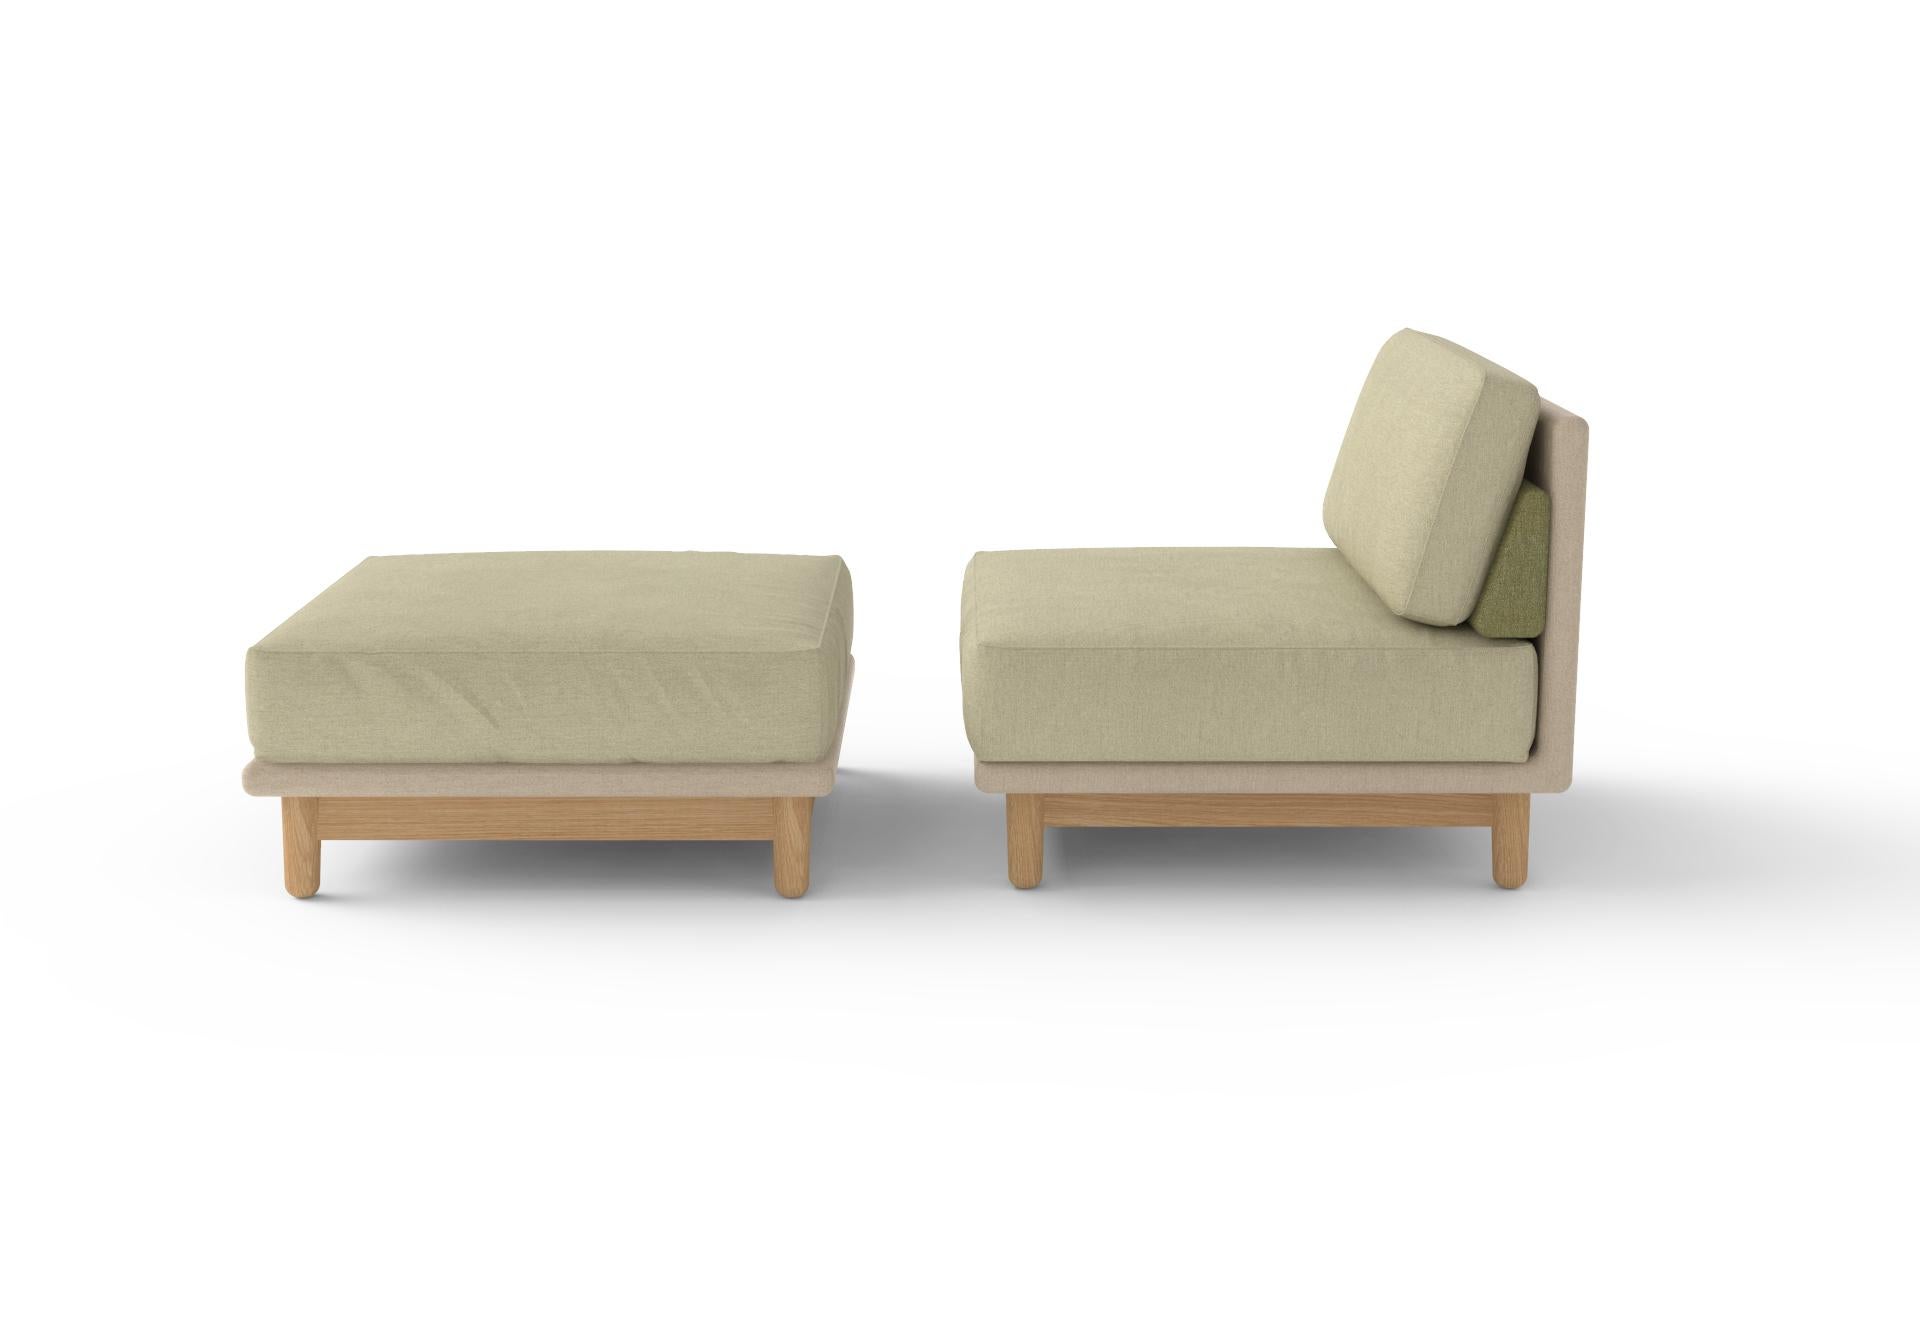 Modern Fernández Modular Sofa Fabric and Wood, Contemporary Mexican Design